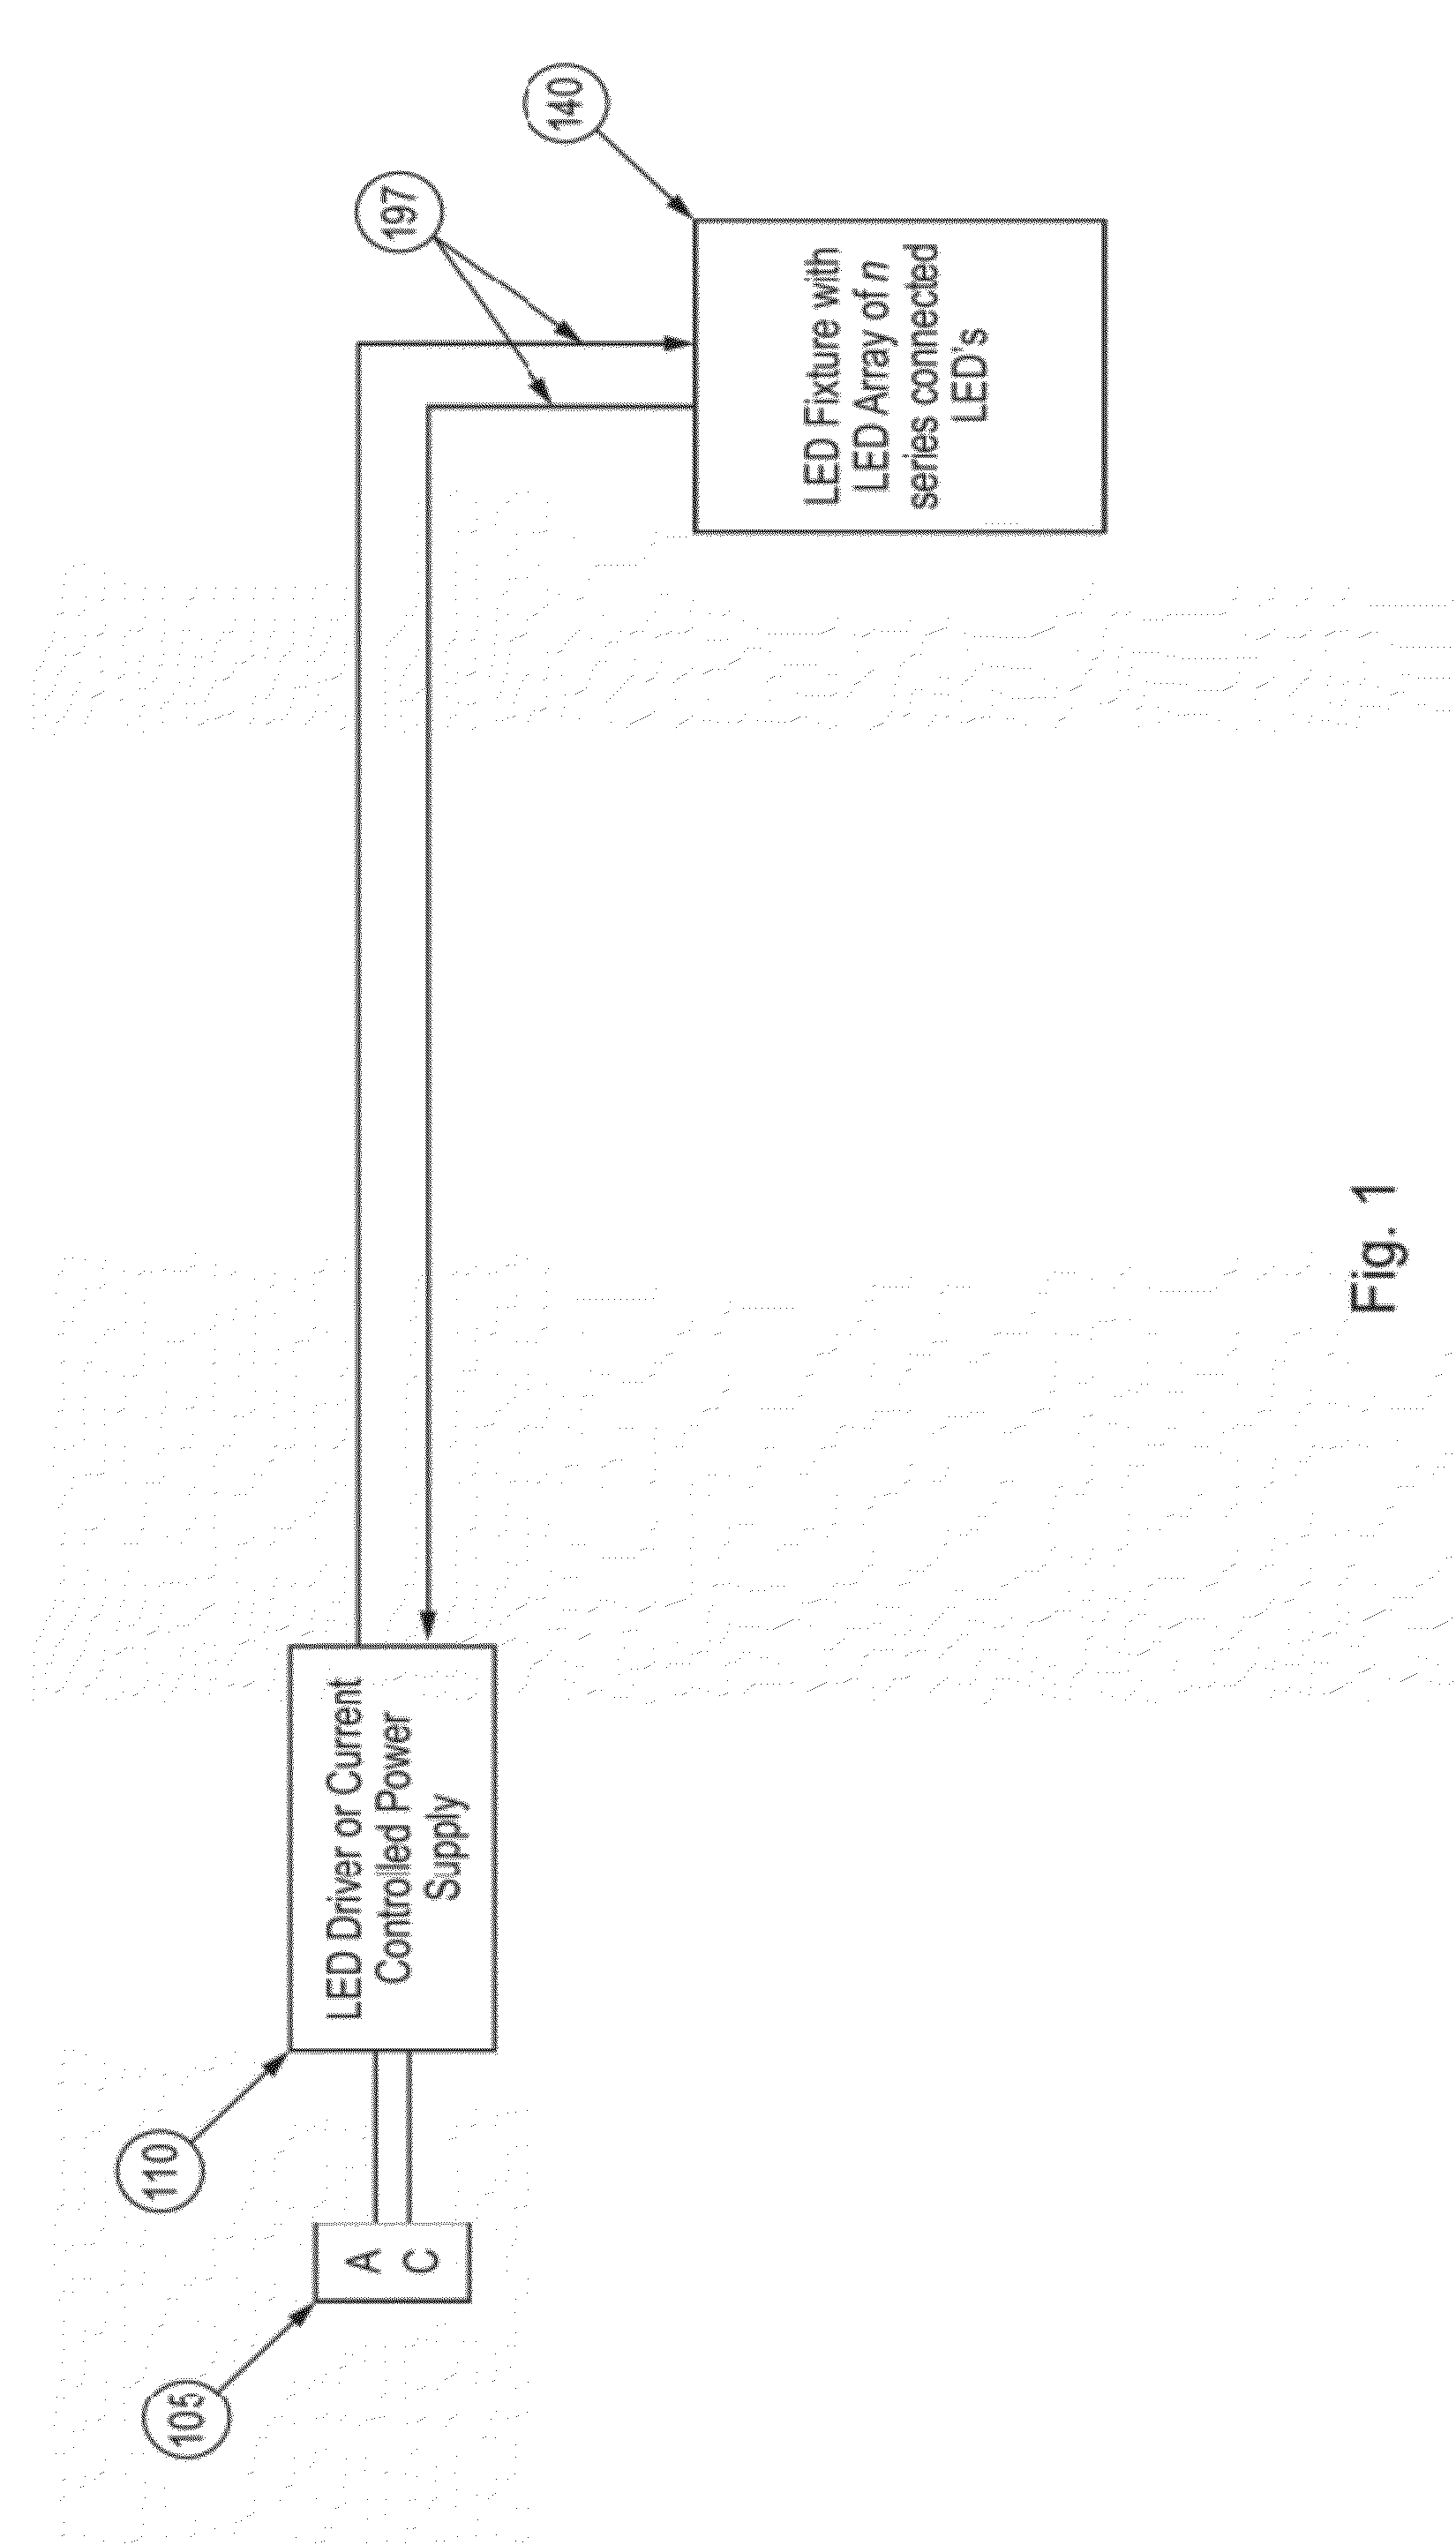 Apparatus, method, and system for LED fixture temperature measurement, control, and calibration